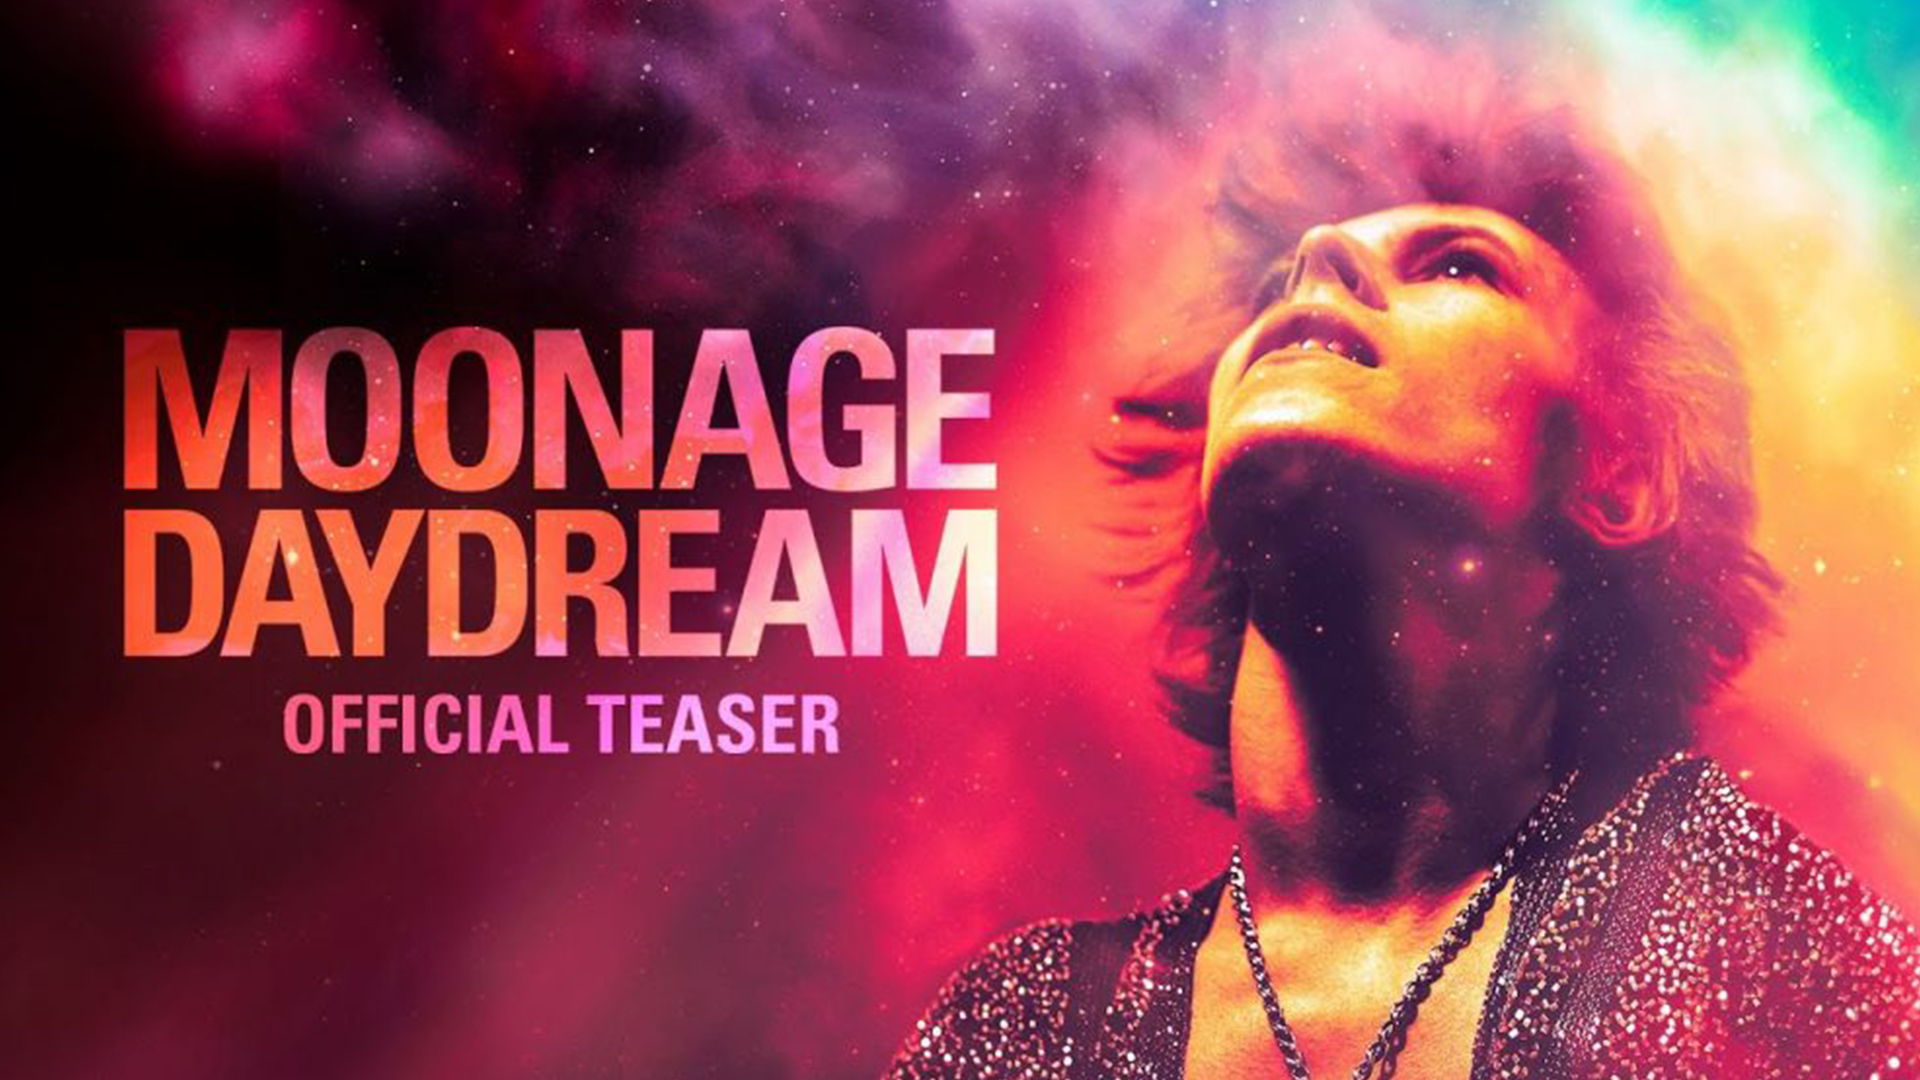 Watch the trailer for Moonage Daydream, David Bowie Documentary